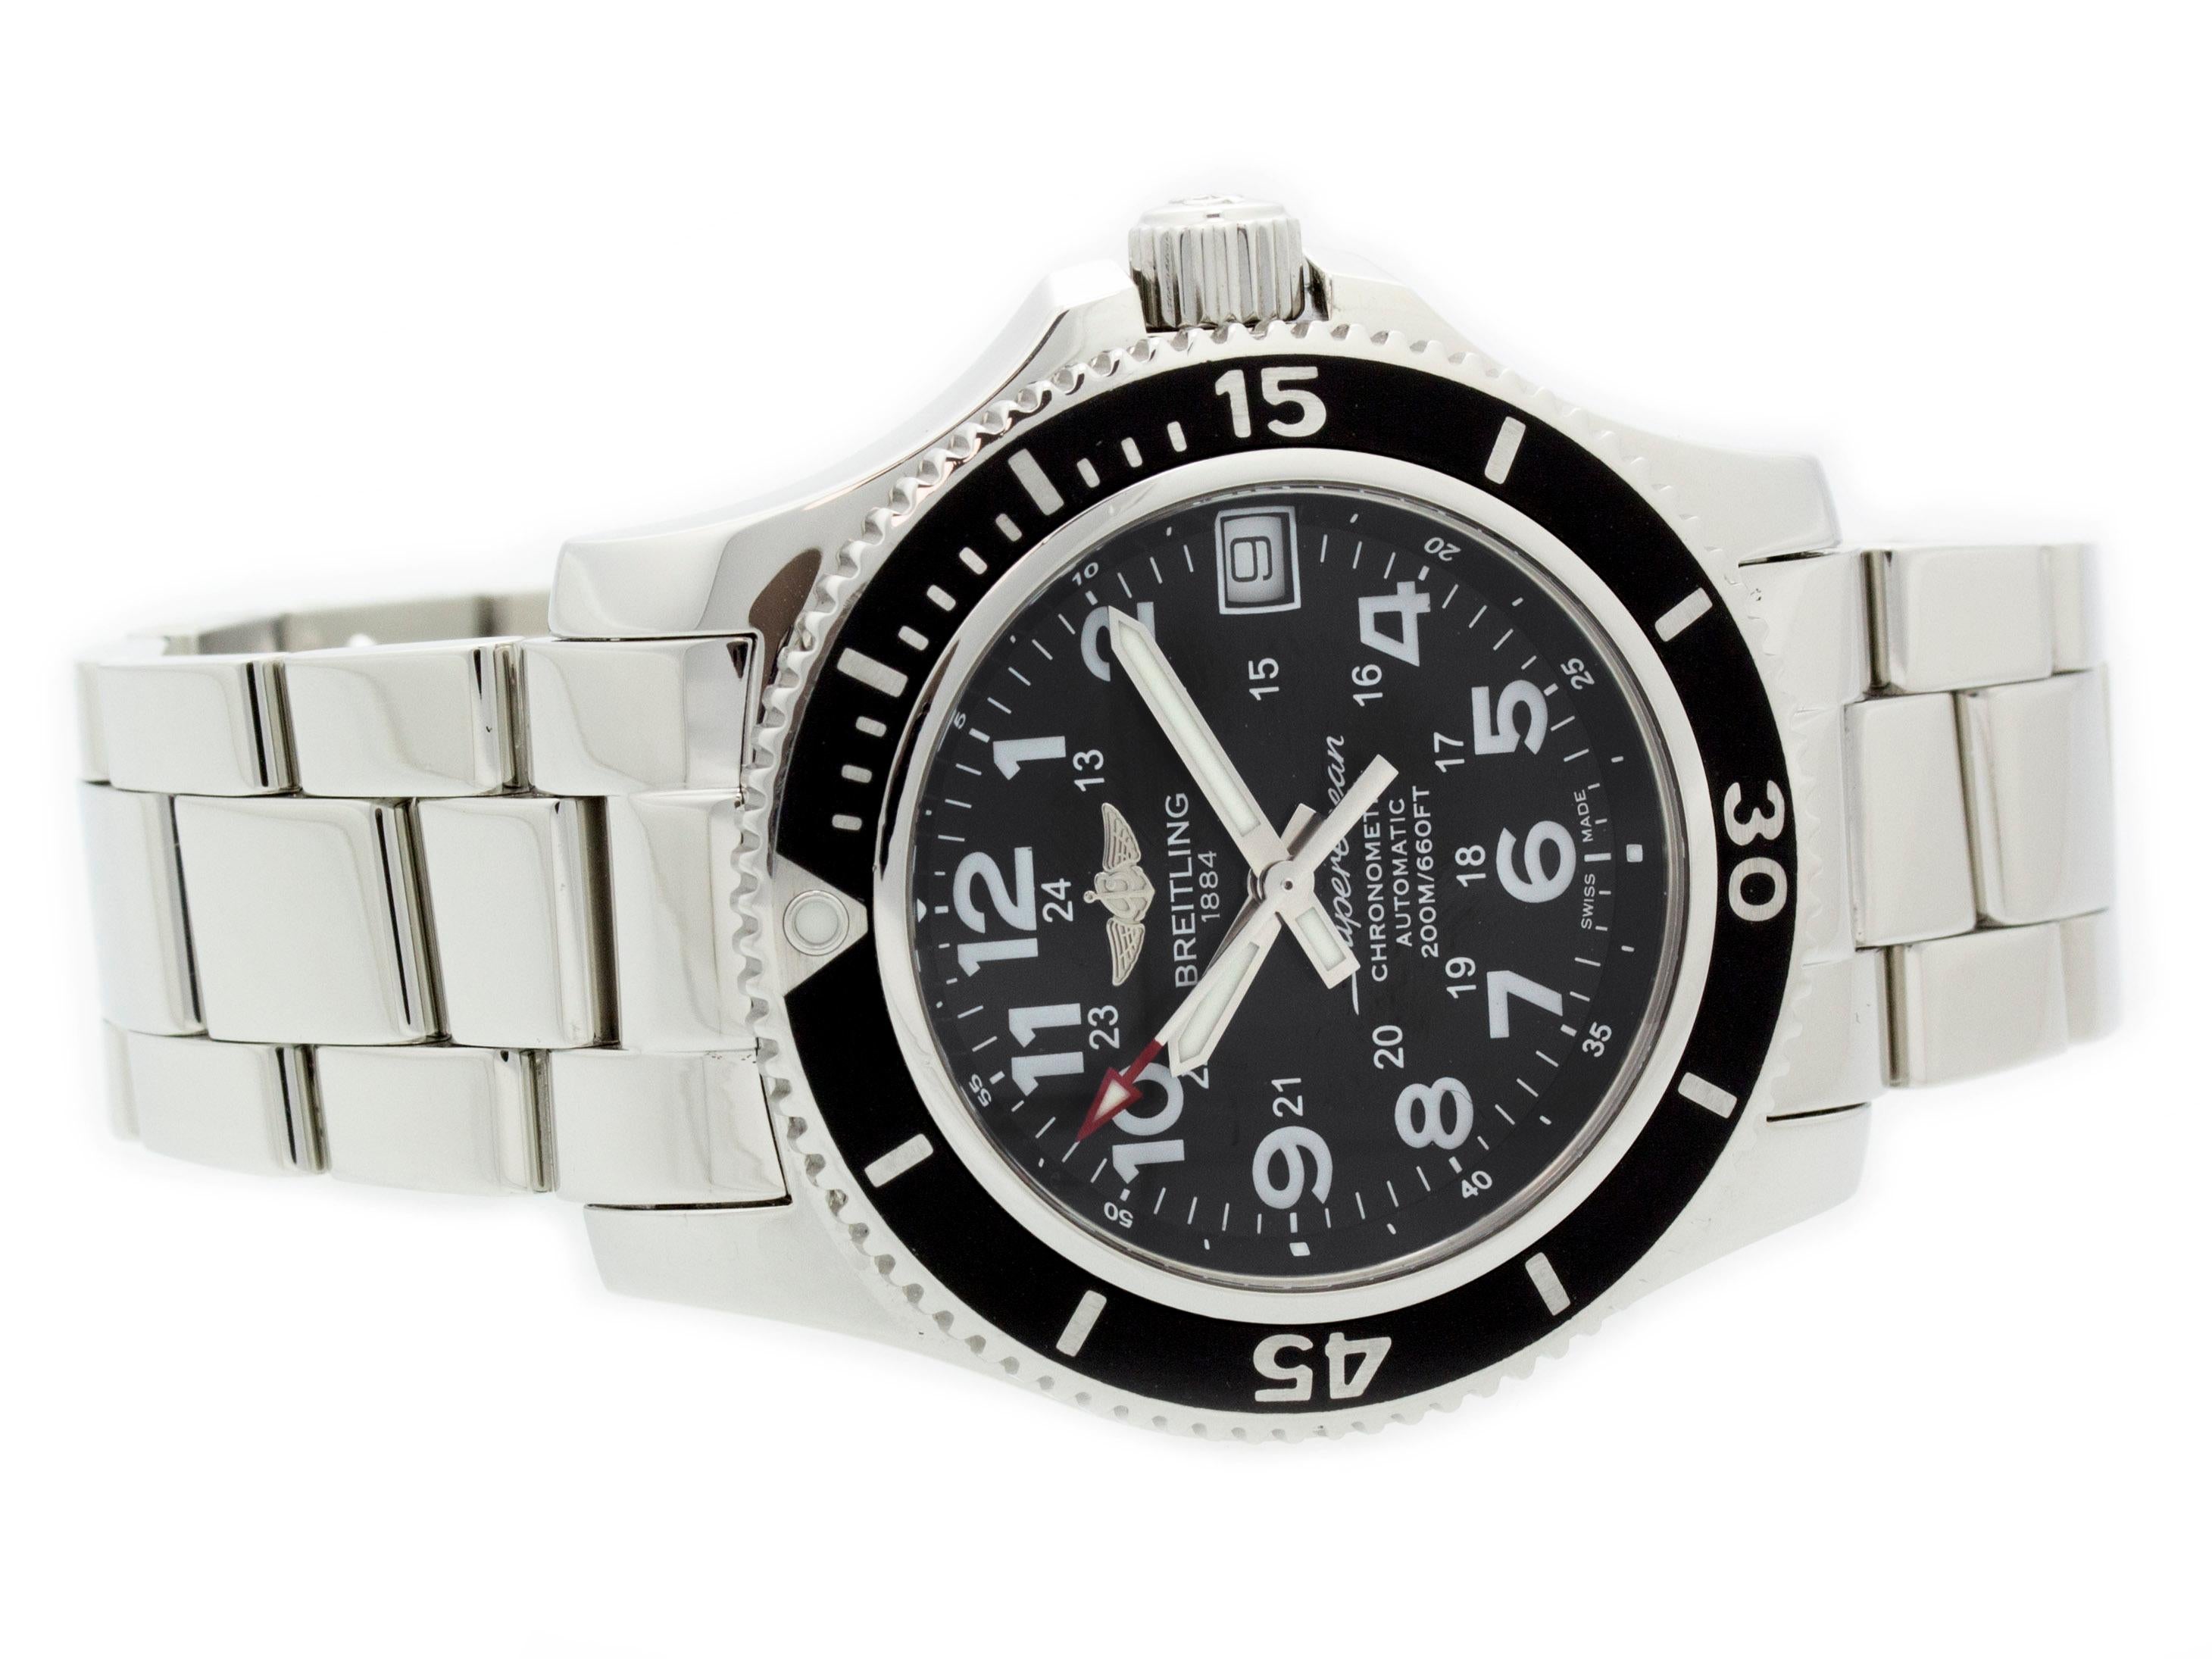 Stainless steel Breitling Superocean II automatic watch with a 36mm case, black dial, and Pro III bracelet with folding buckle. Features include hours, minutes, seconds, and date. Comes with Deluxe Gift Box and 2 Year Store